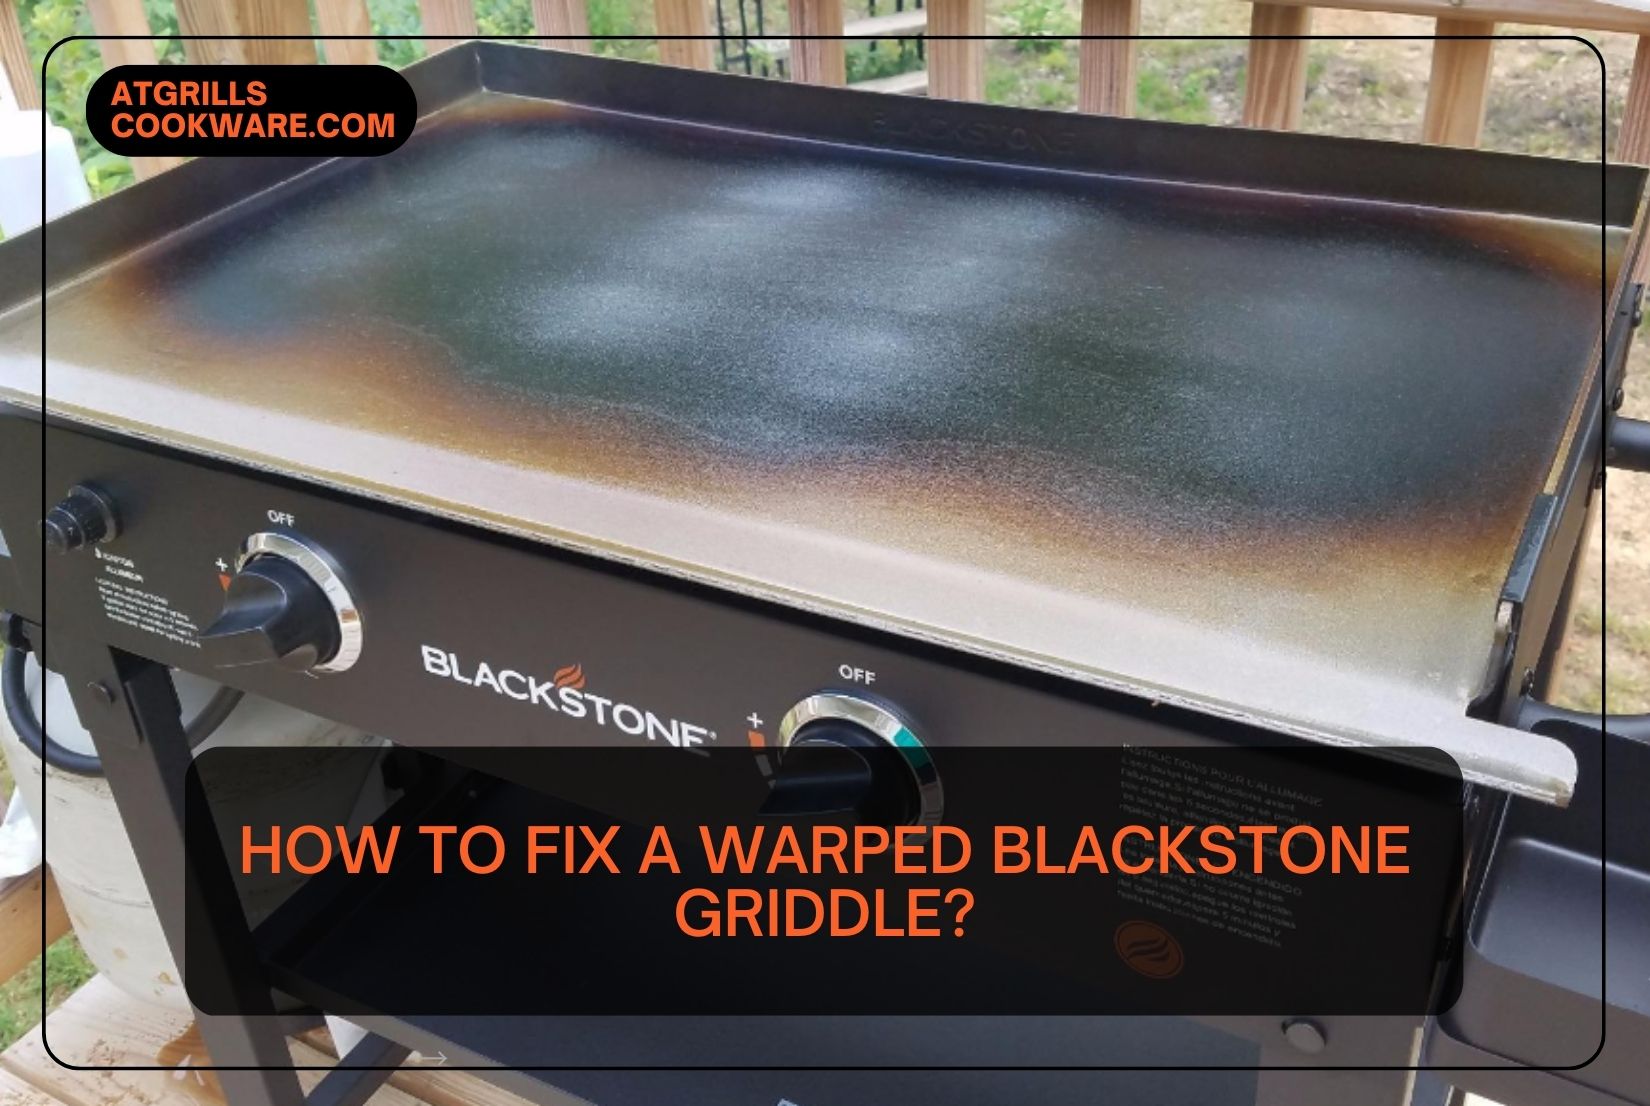 How to fix a warped Blackstone griddle?